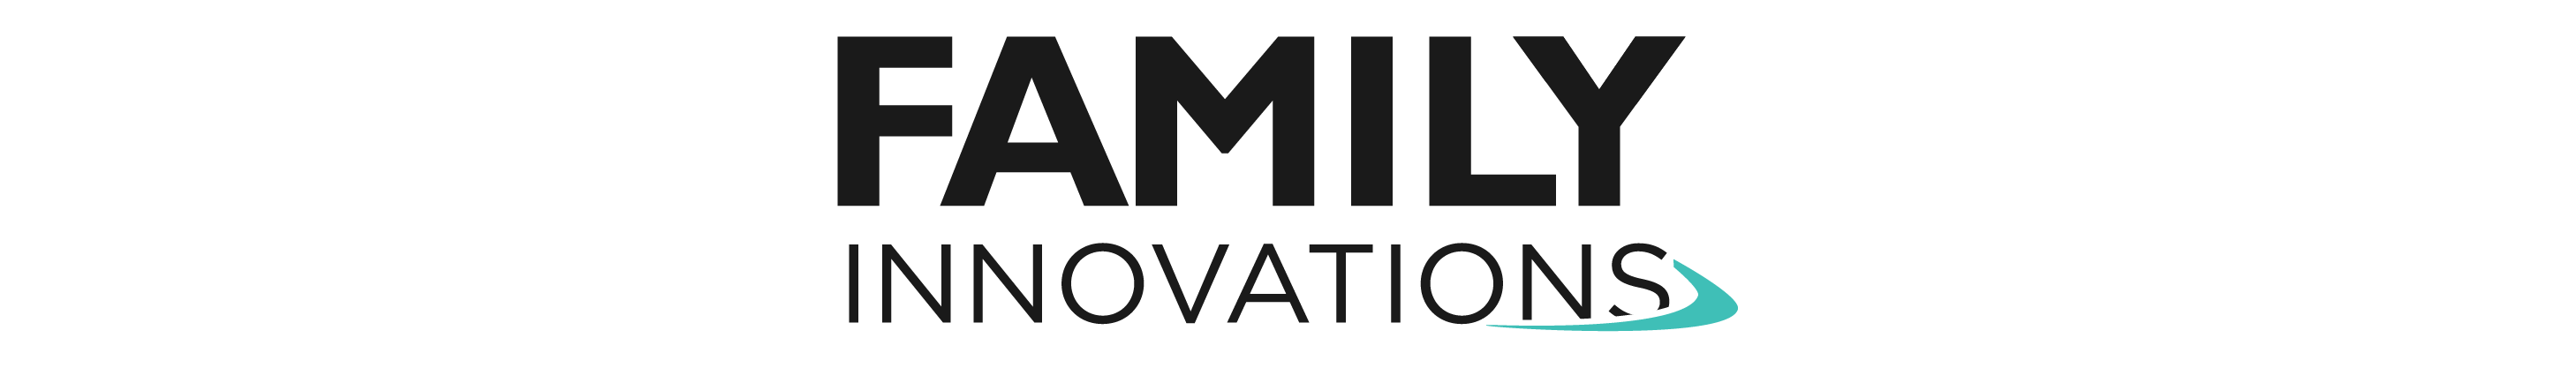 images/Family Innovations Middle.gif